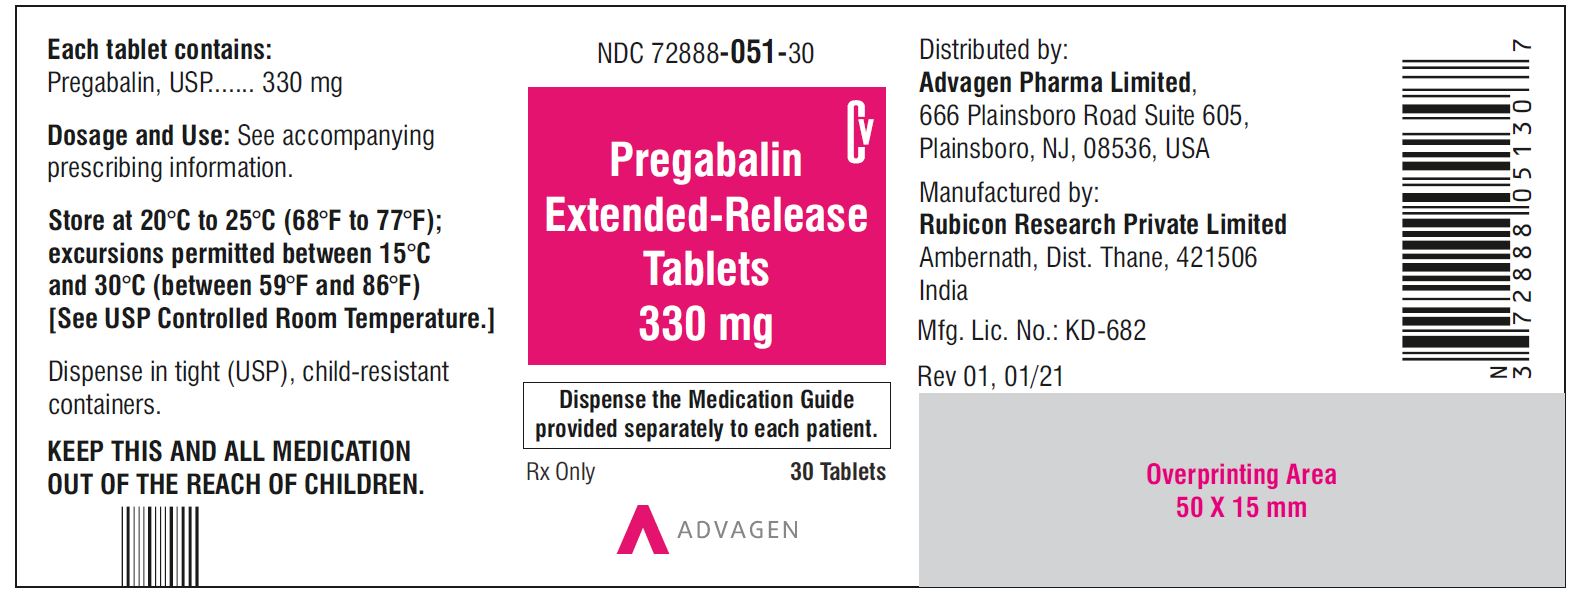 Pregabalin Extended-Release tablets, 330 mg - NDC: <a href=/NDC/72888-051-30>72888-051-30</a> - 30 Tablets Container Label